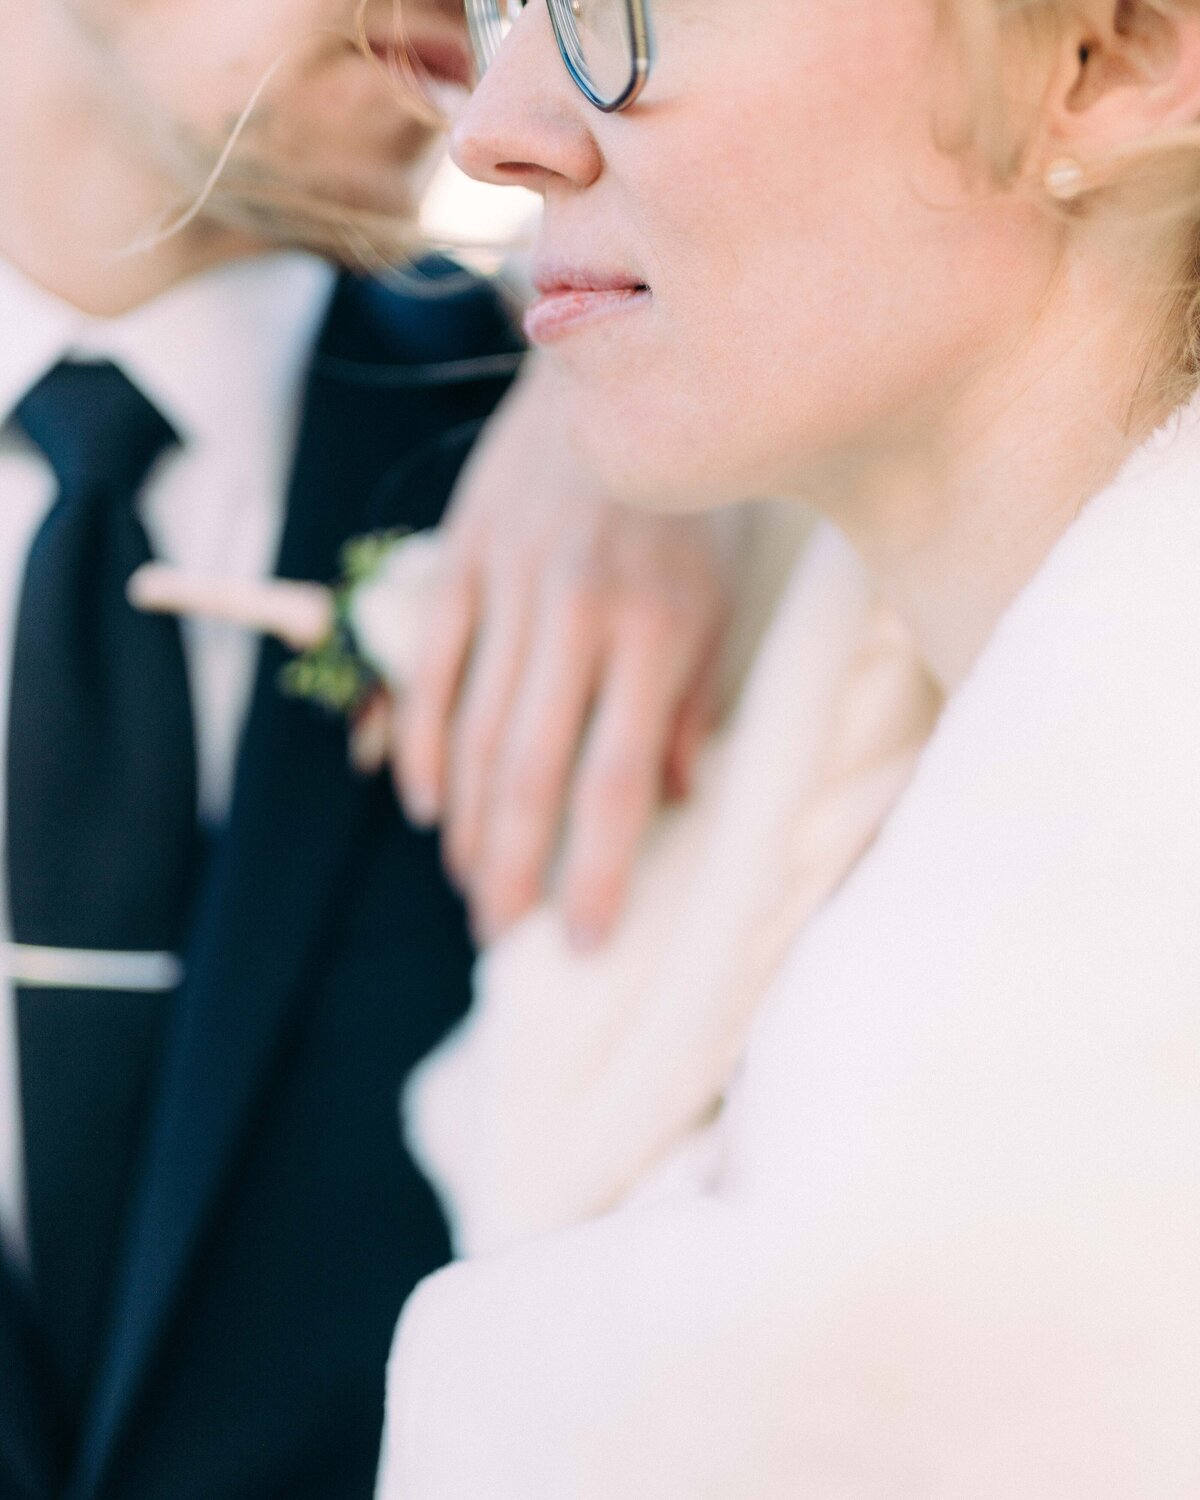 Emotional Detail: Bride and Groom's Lower Faces in Fine Art Shot